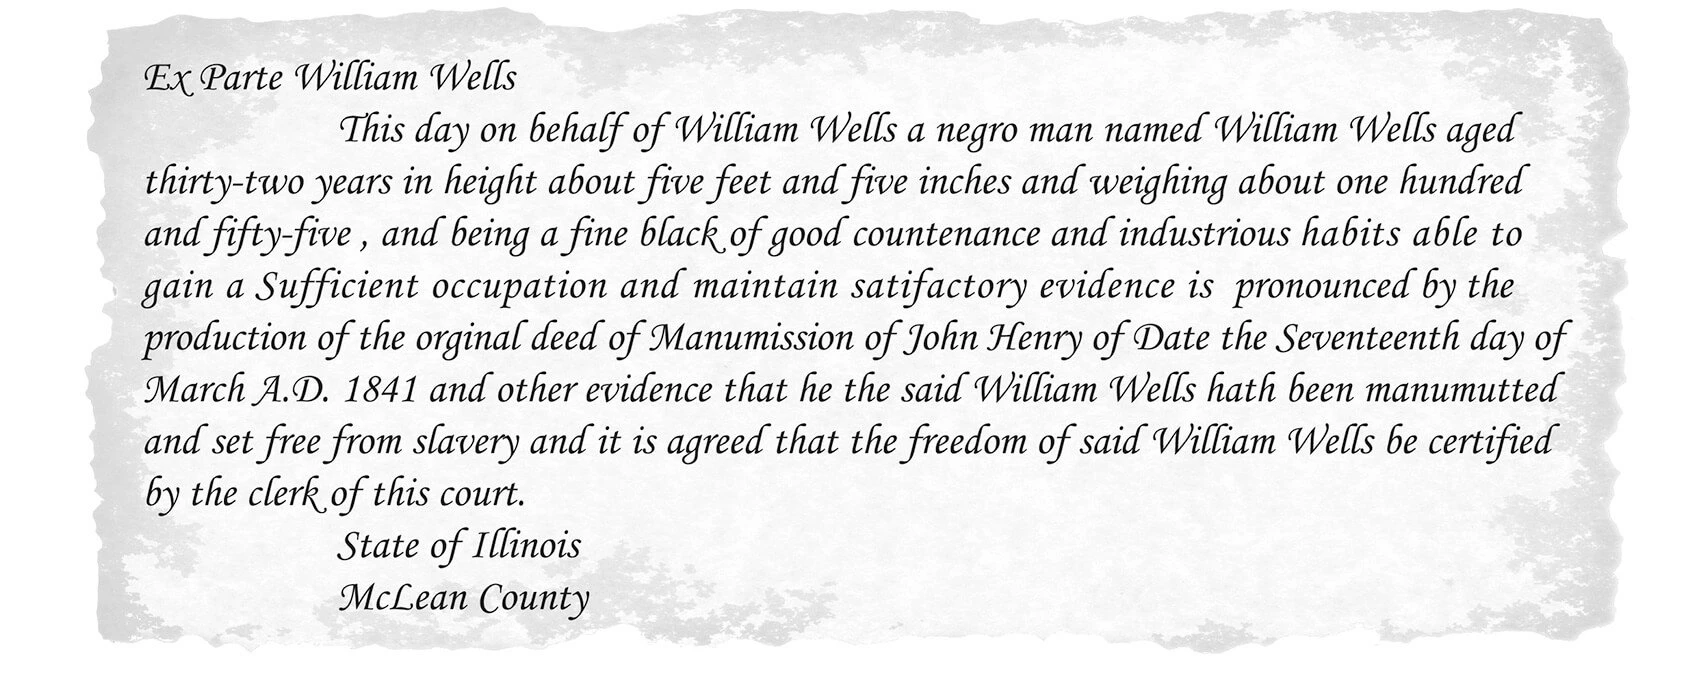 Ex Parte William Wells This day on behalf of William Wells a negro man named William Wells aged thirty-two years in height about five feet five inches and weighing about one hundred and fifty-five, and being a fine black of good countenance and industrious habits able to gain Sufficient occupation and maintain satisfactory evidence is pronounced by the production of the original deed of Manumission of John Henry of Date the Seventeenth day of March A.D. 1841 and other evidence that he the said William Wells hath been manumutted and set free from slavery and it is agreed that the freedom of said William Wells be certified by the clerk of this court. State of Illinois McLean County